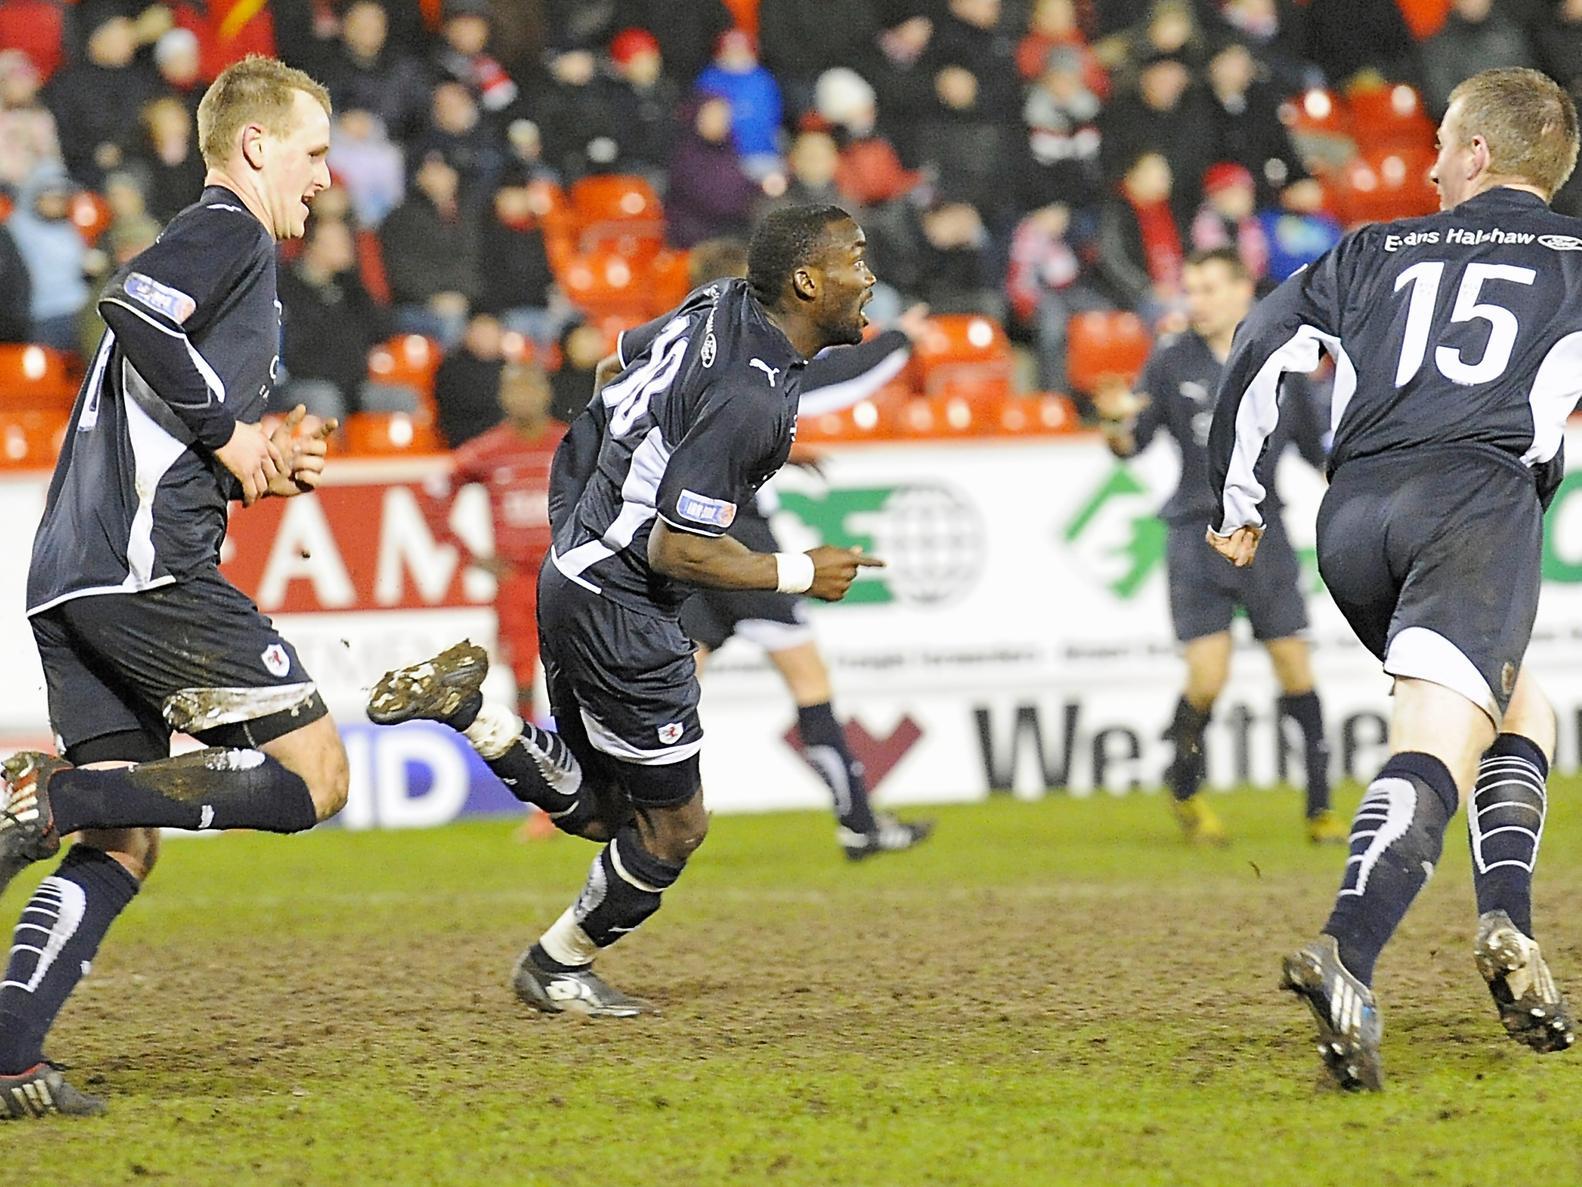 Gregory Tade races towards the Raith fans after scoring what proved to be the winning goal.